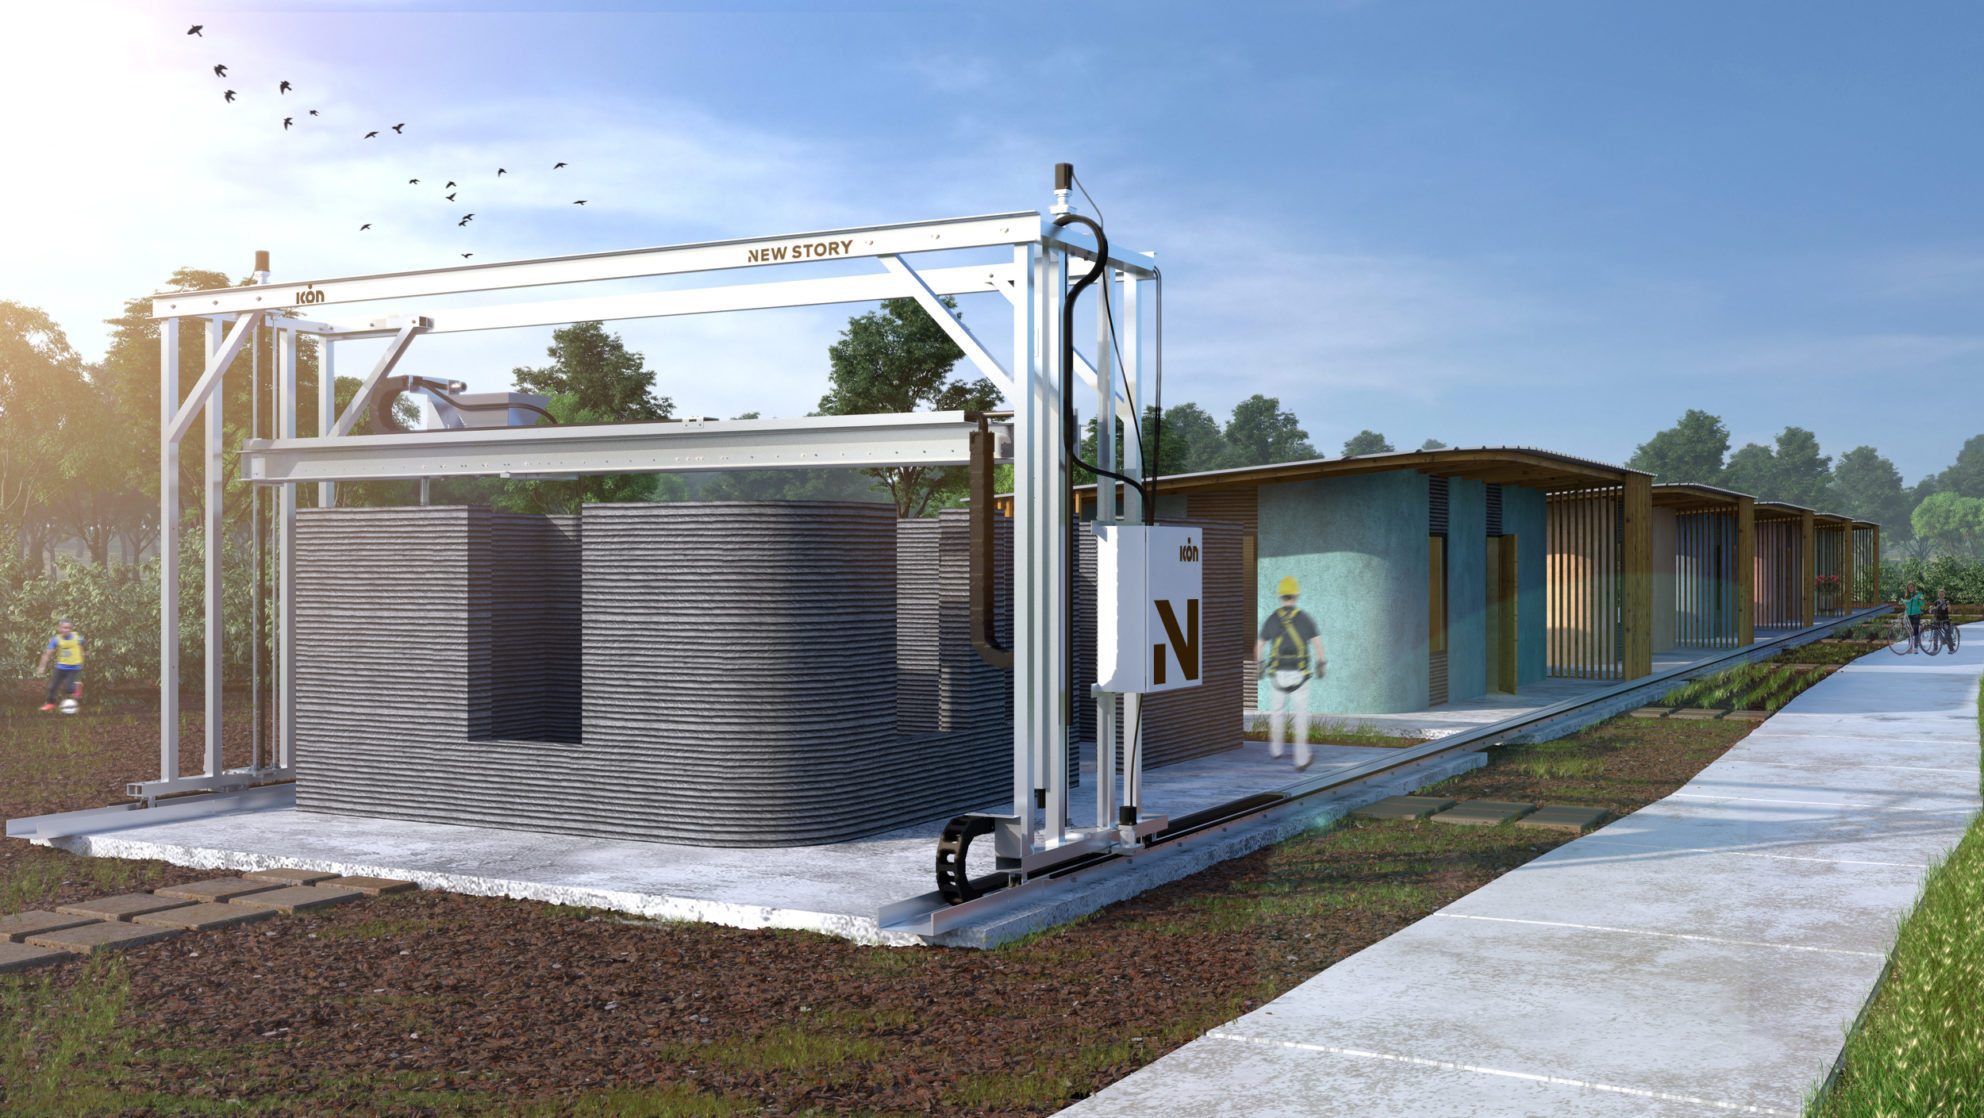 Startups Unveil $4,000 Home Built With A 3-D Printer - ICON NewStorypsD 1984x1118